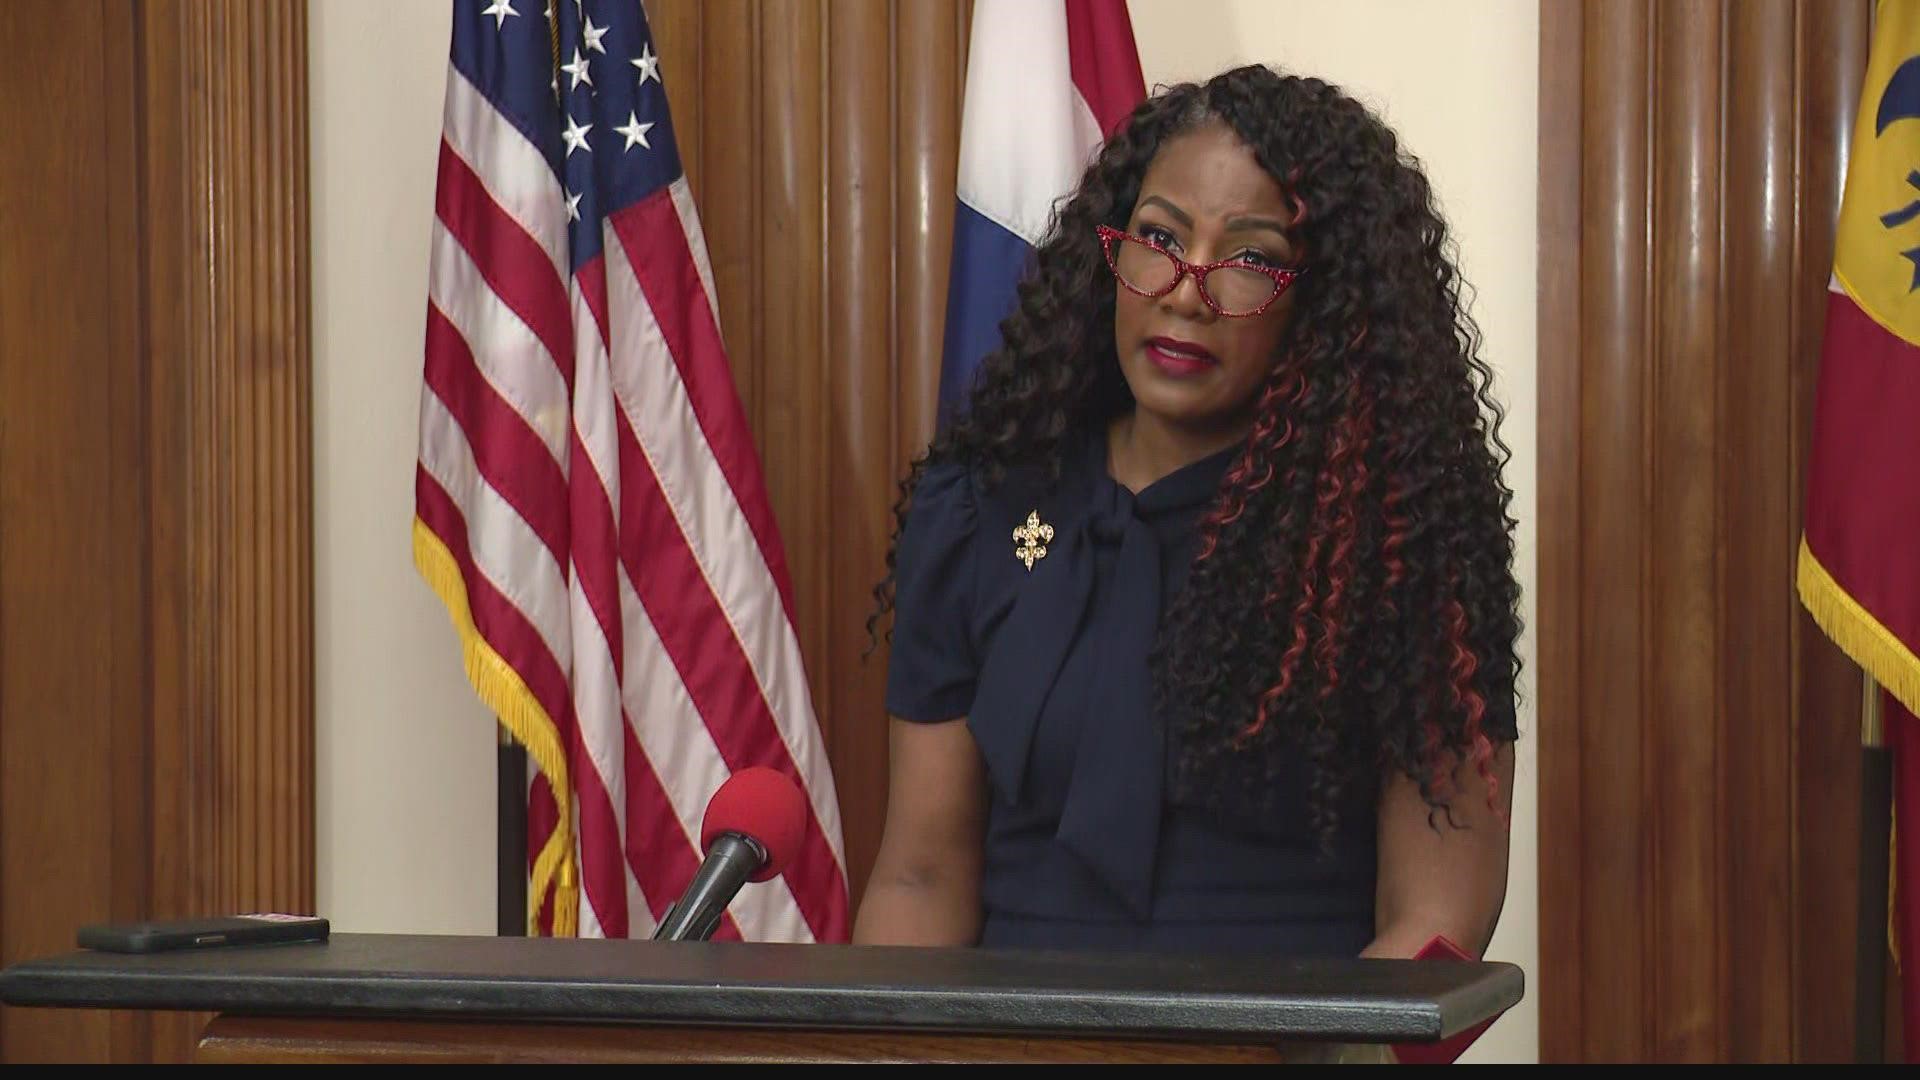 Lewis Reed was the latest alderman to resign Tuesday. Mayor Jones said she thinks the bribery indictment against the aldermen is just "the tip of the iceberg."